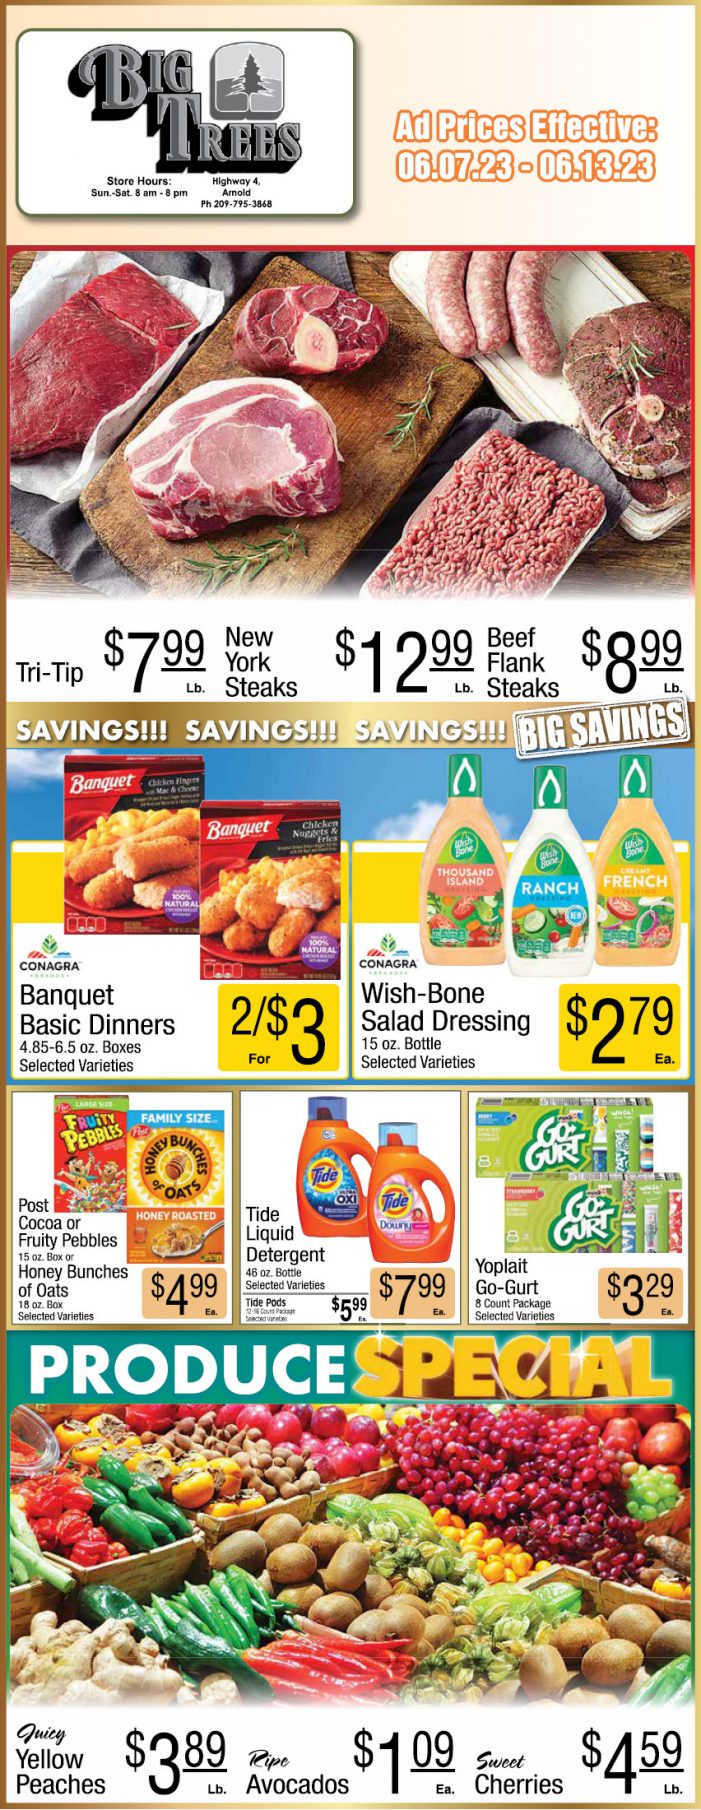 Big Trees Market Weekly Ad, Grocery, Produce, Meat & Deli Specials June 7 ~ 13!  Shop Local & Save!